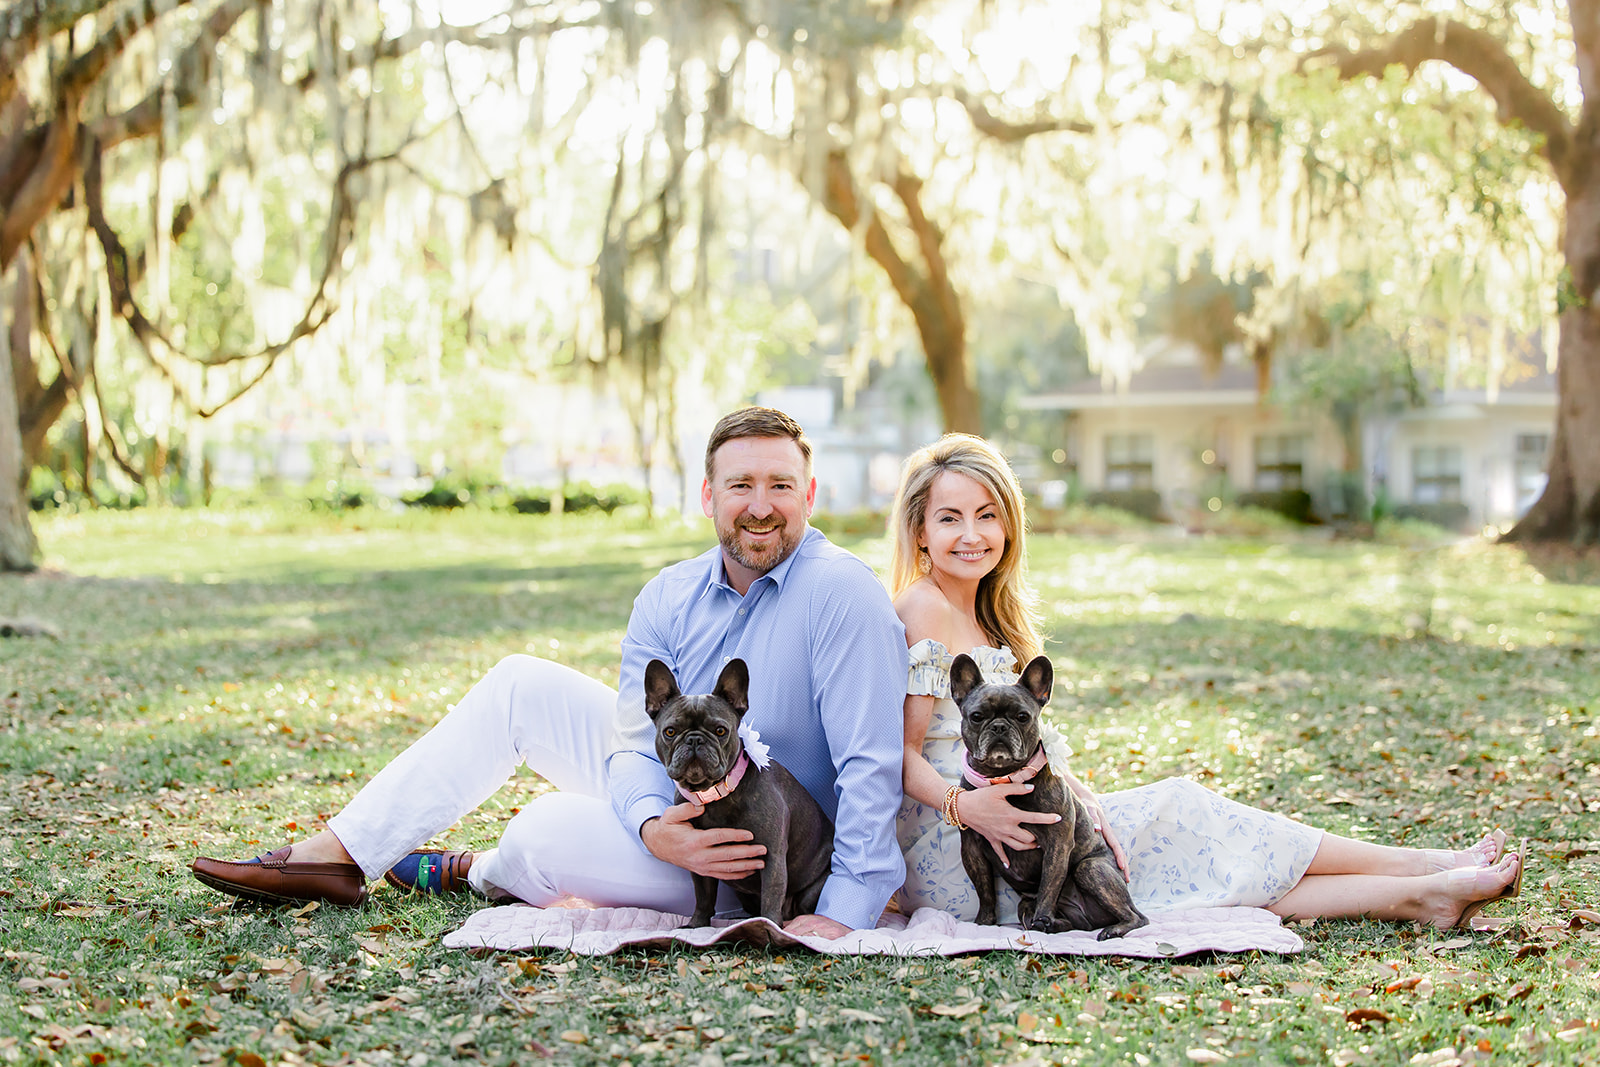 St. Simons Island Photography - Frenchies at the beach!